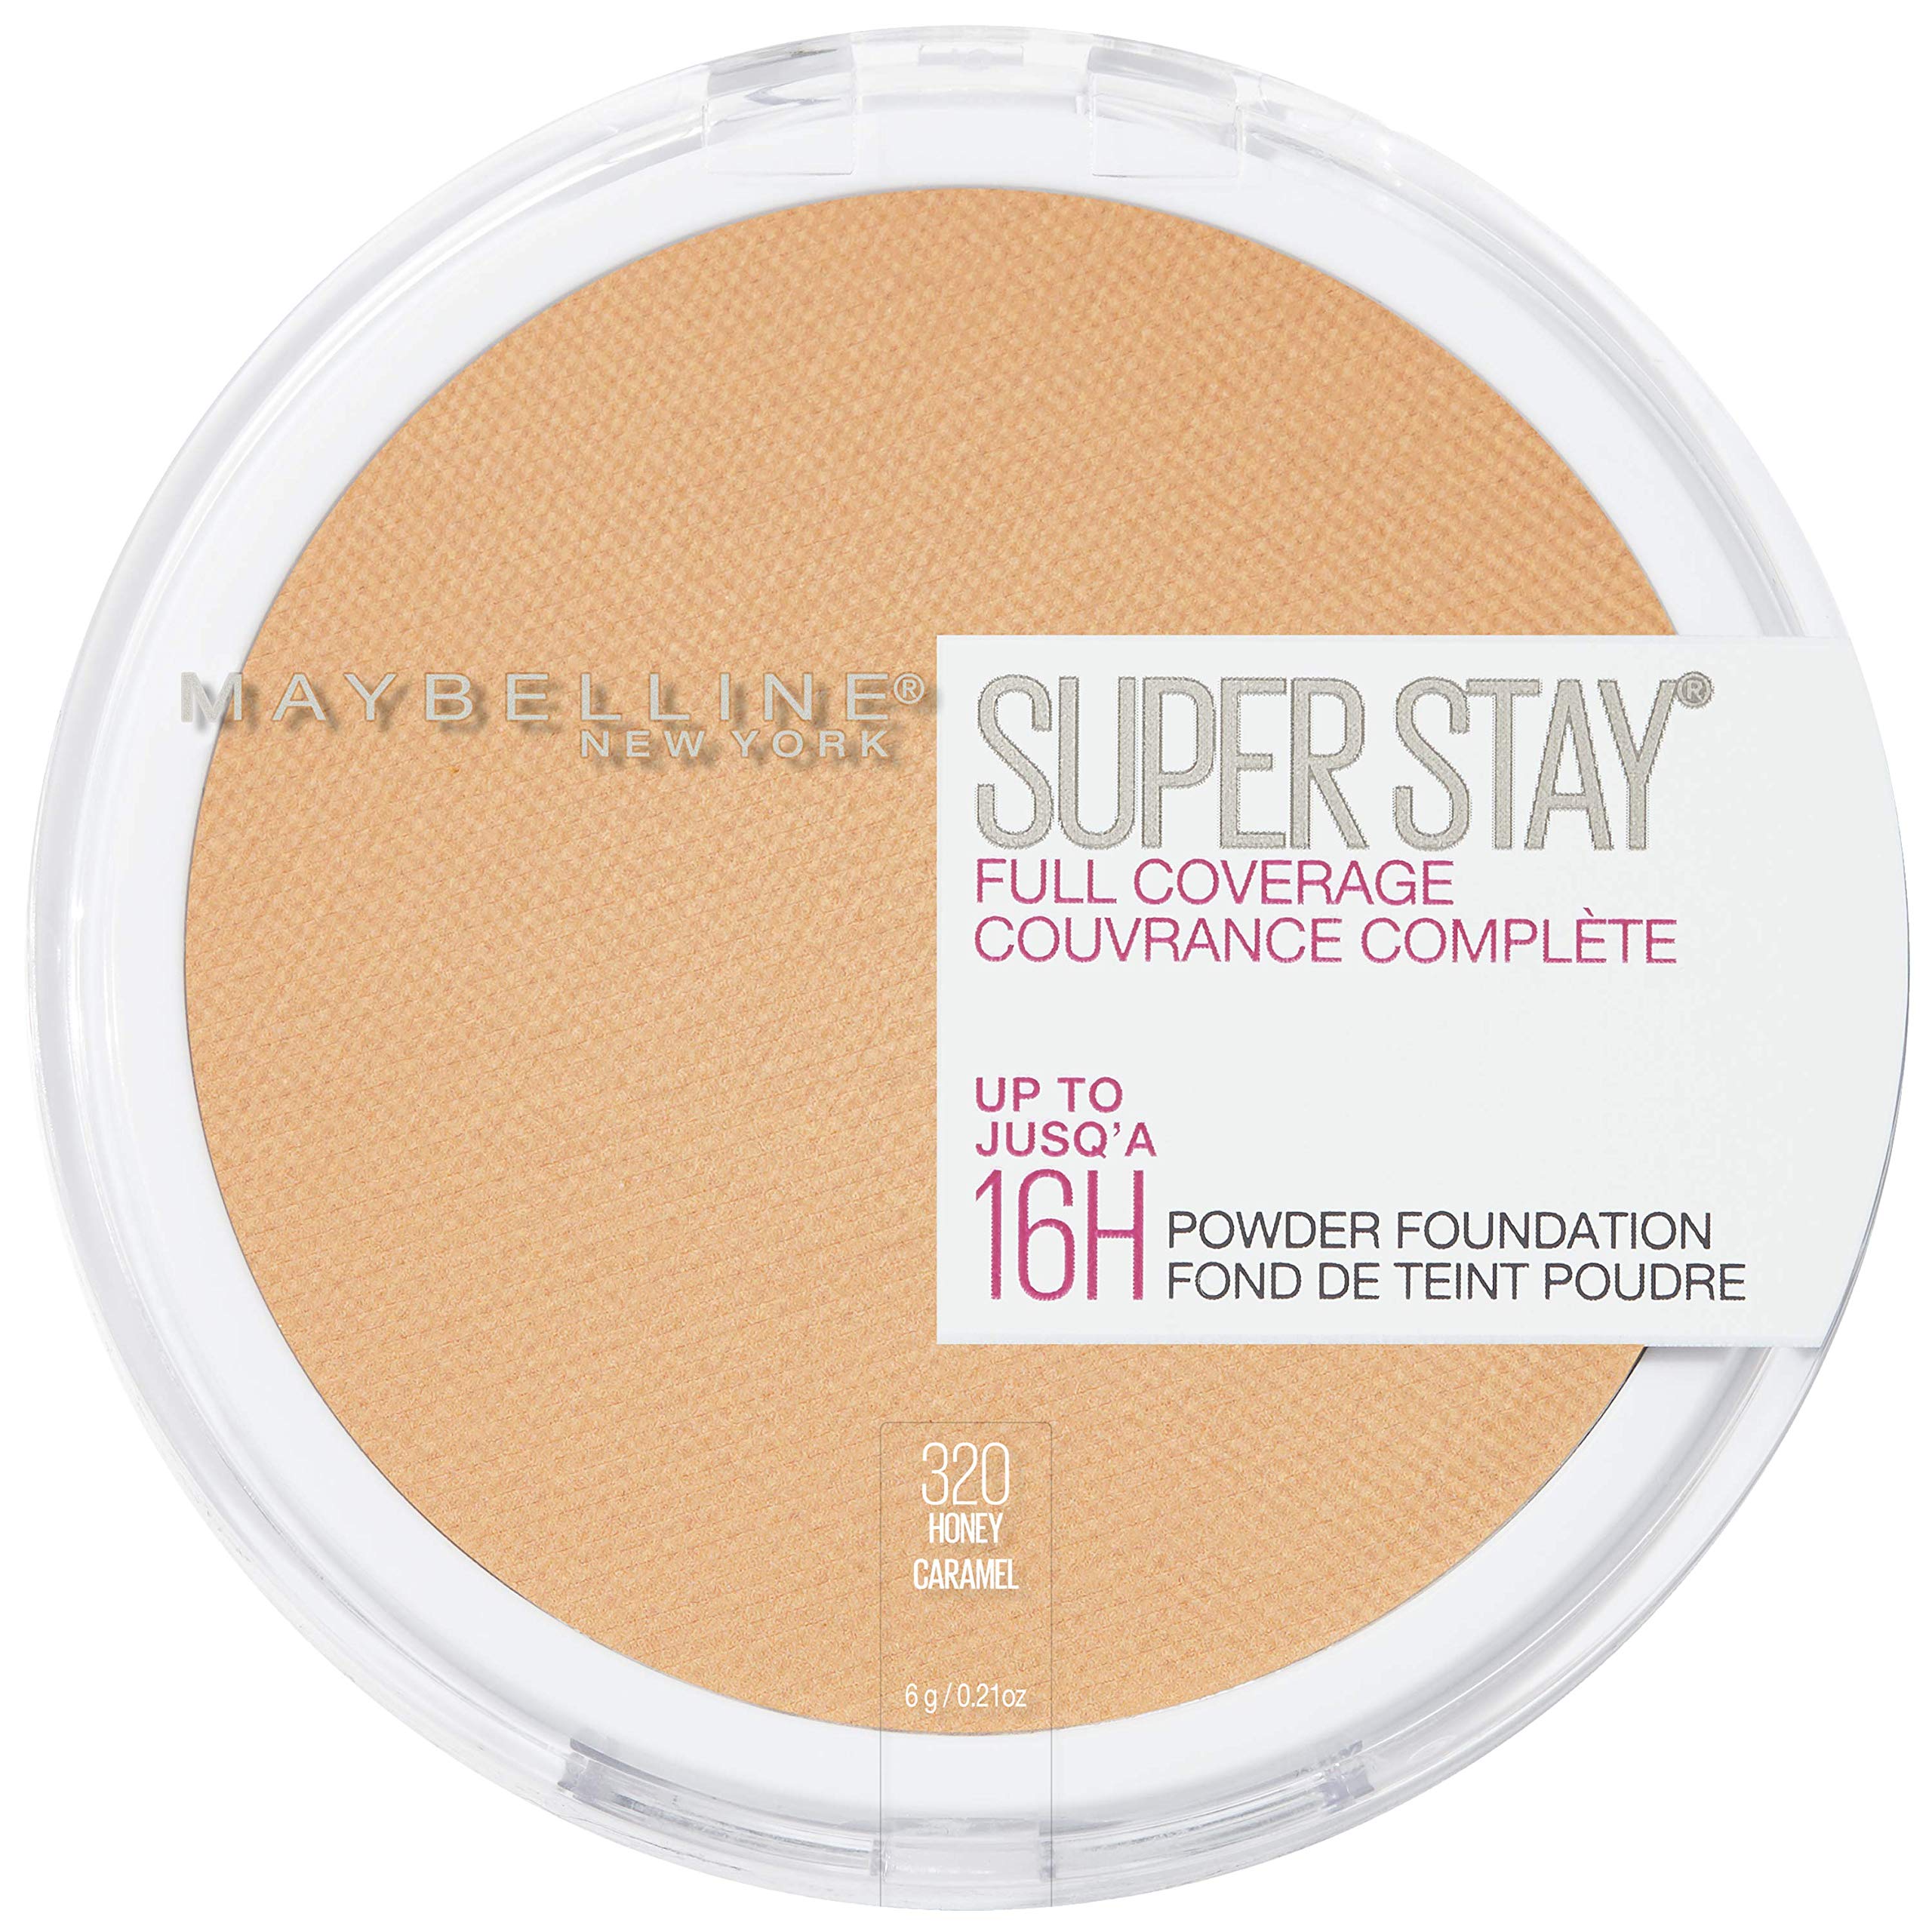 Maybelline Super Stay Full Coverage Powder Foundation Makeup, Up to 16 Hour Wear, Soft, Creamy Matte Foundation, Honey, 1 Count